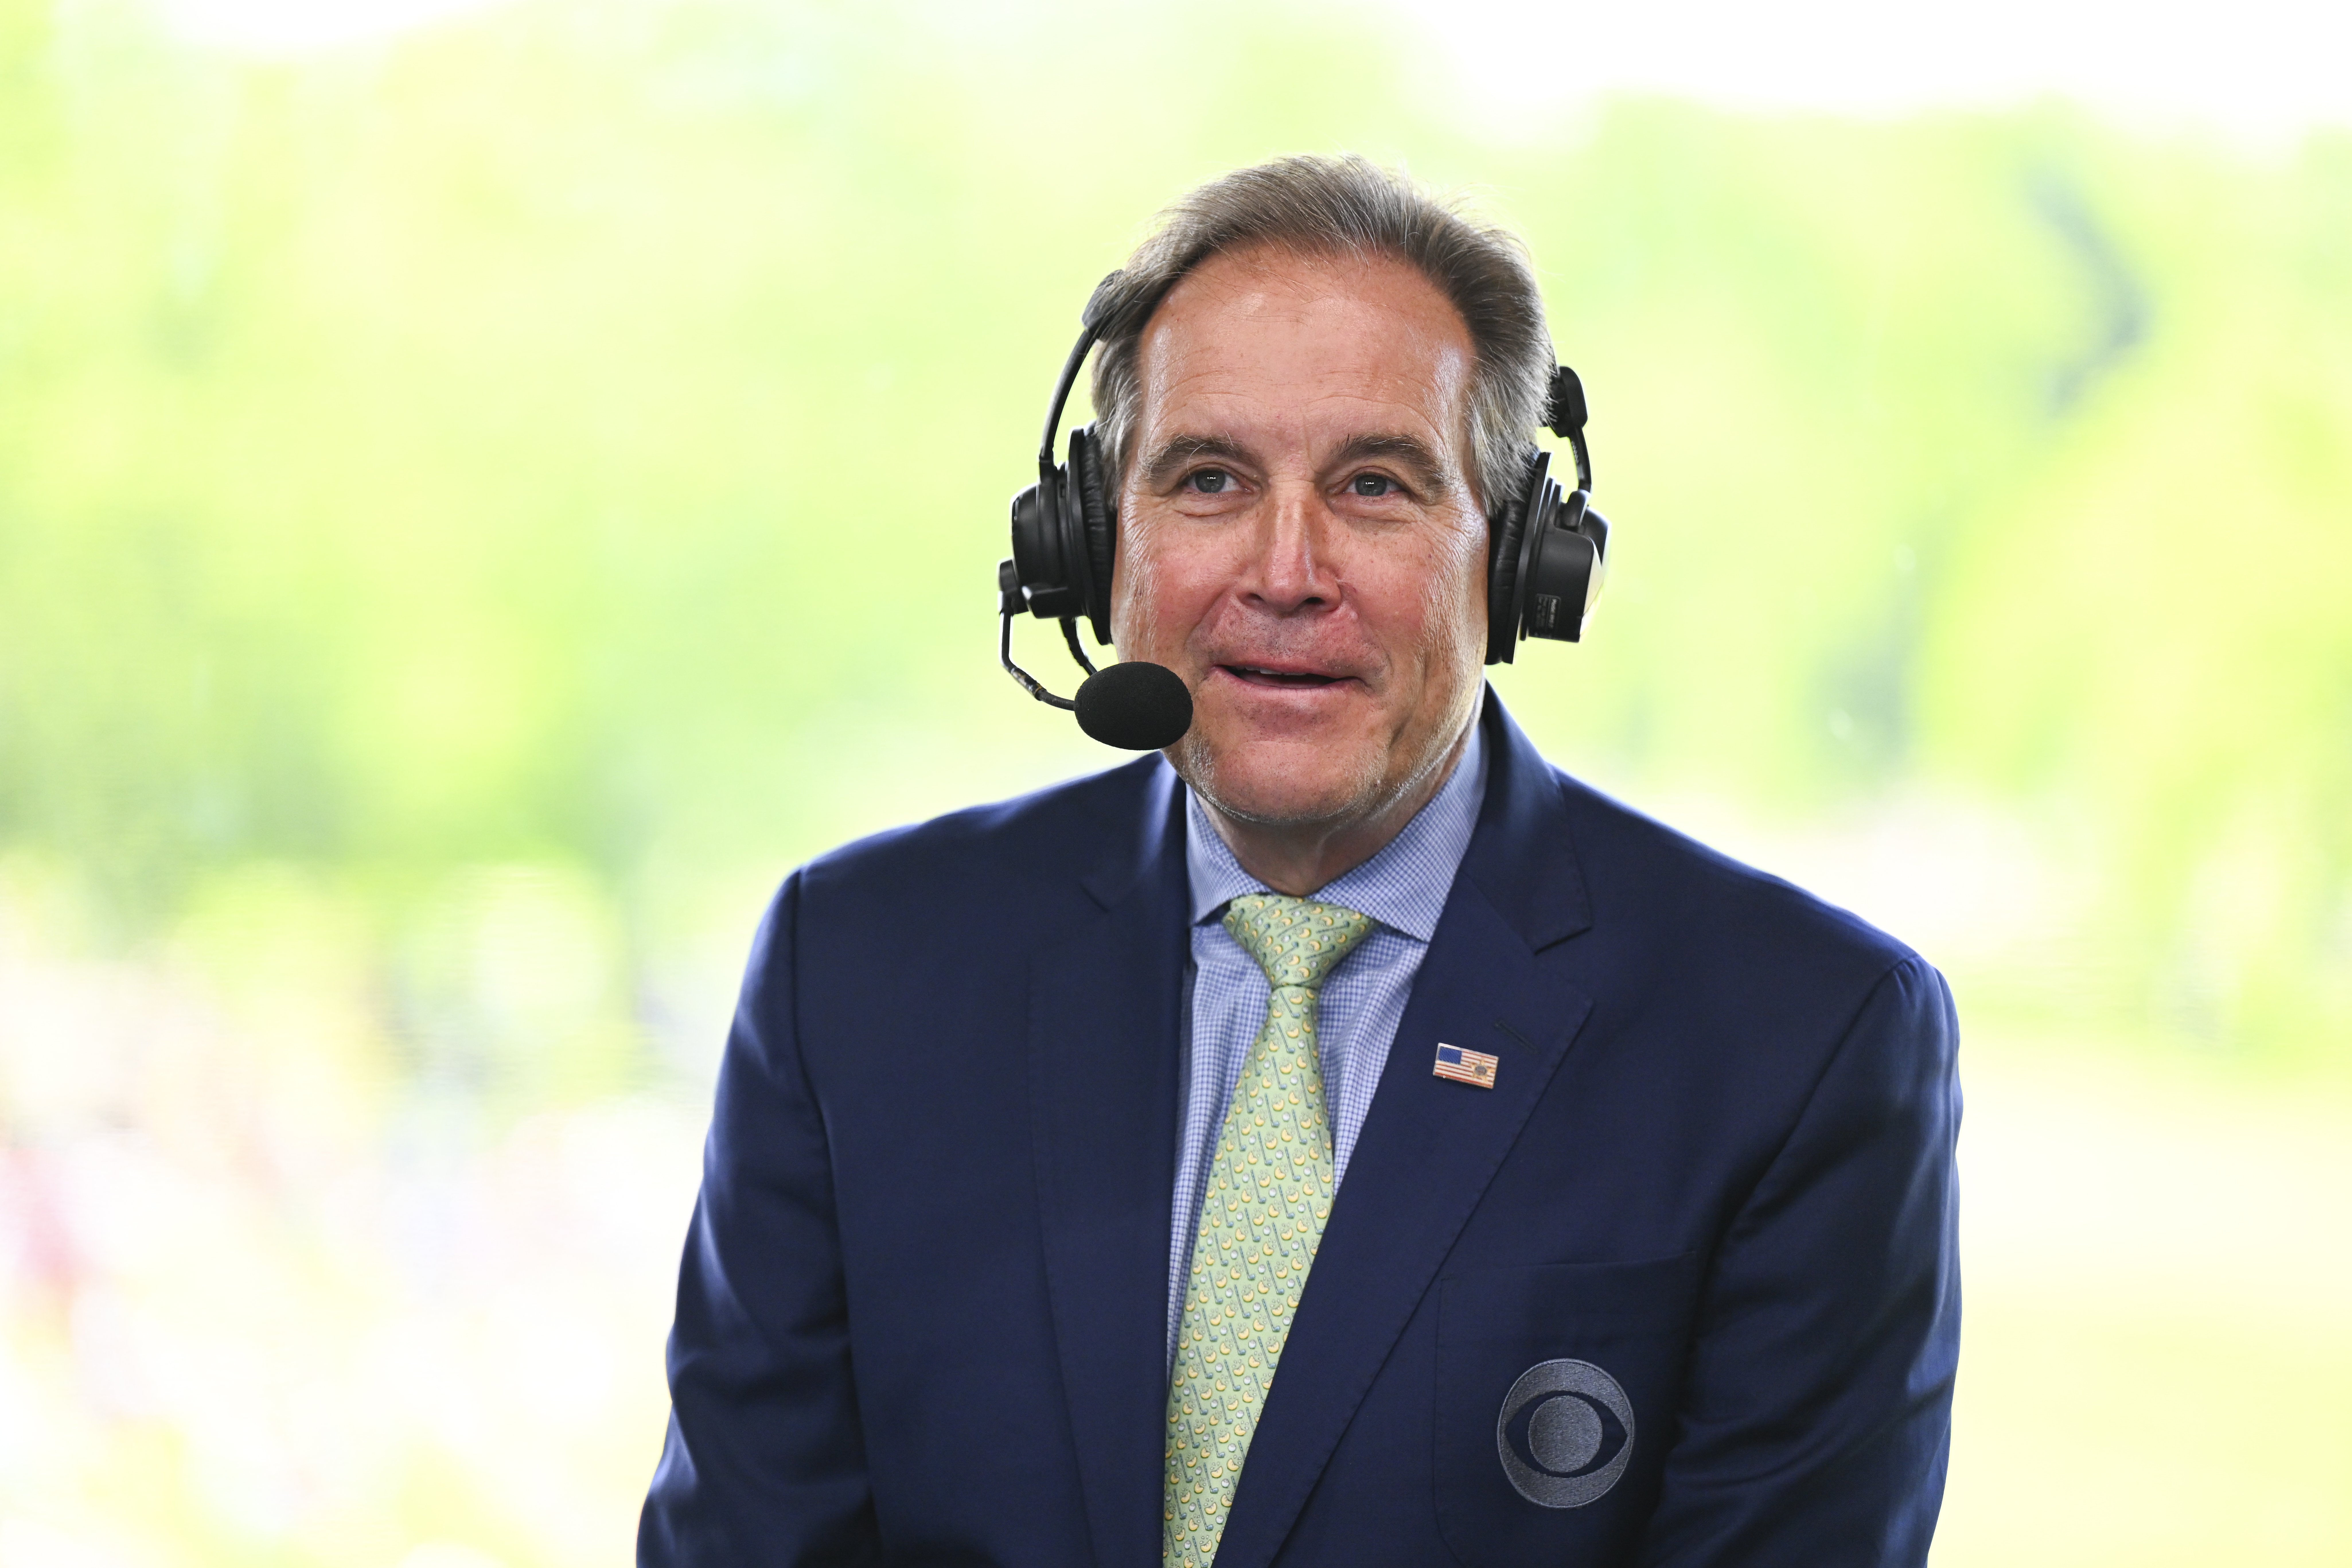 Jim Nantz during the Memorial Tournament at Muirfield Village Golf Club on June 4, 2022, in Dublin, Ohio. | Source: Getty Images